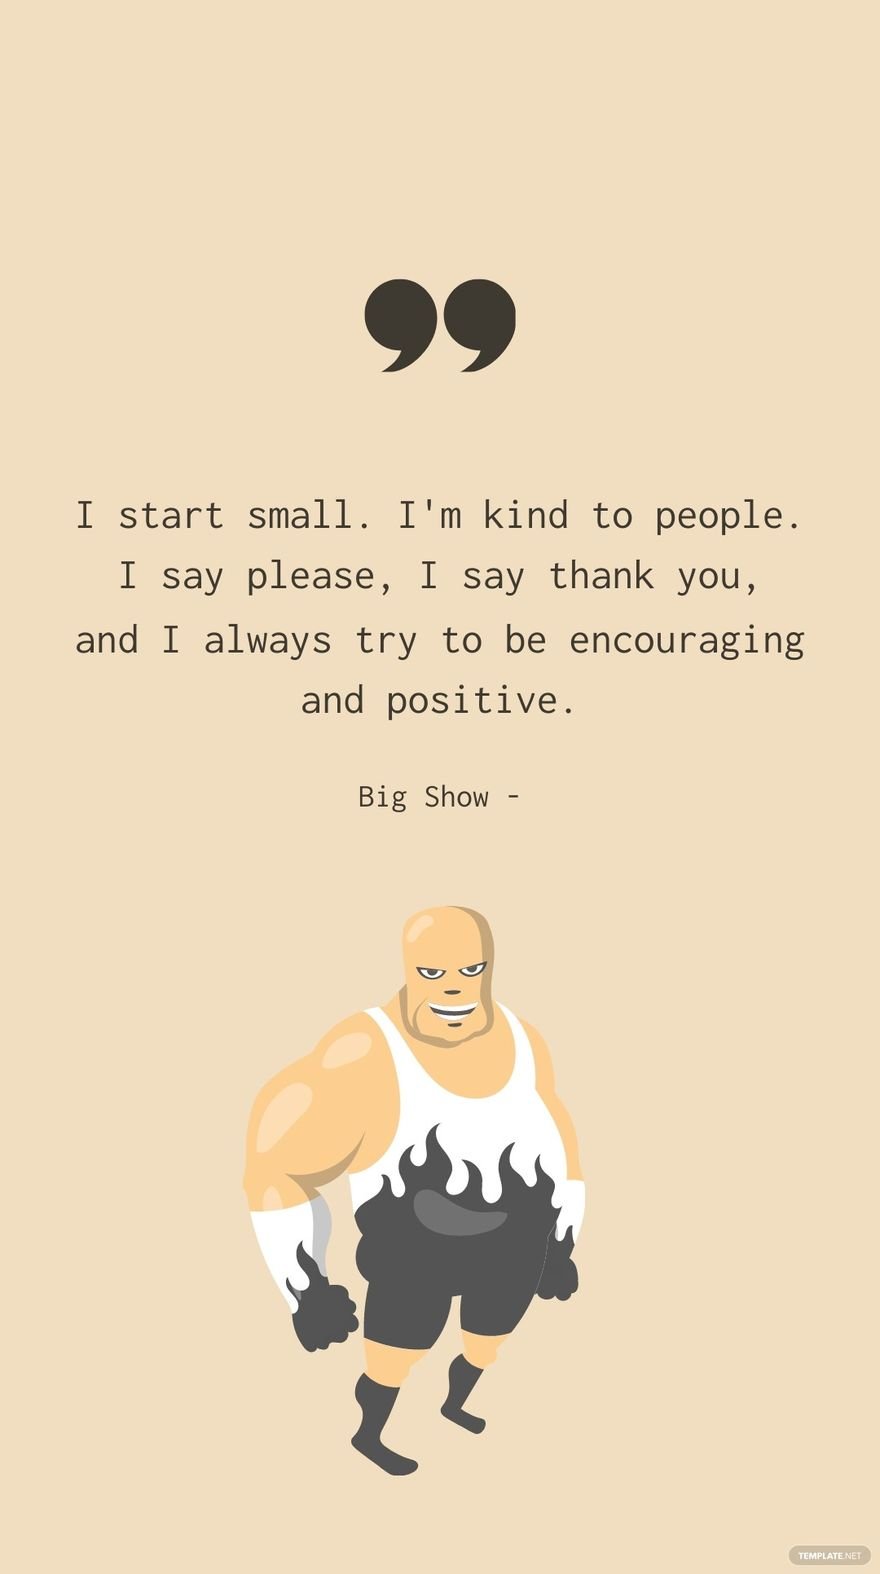 Big Show - I start small. I'm kind to people. I say please, I say thank you, and I always try to be encouraging and positive.